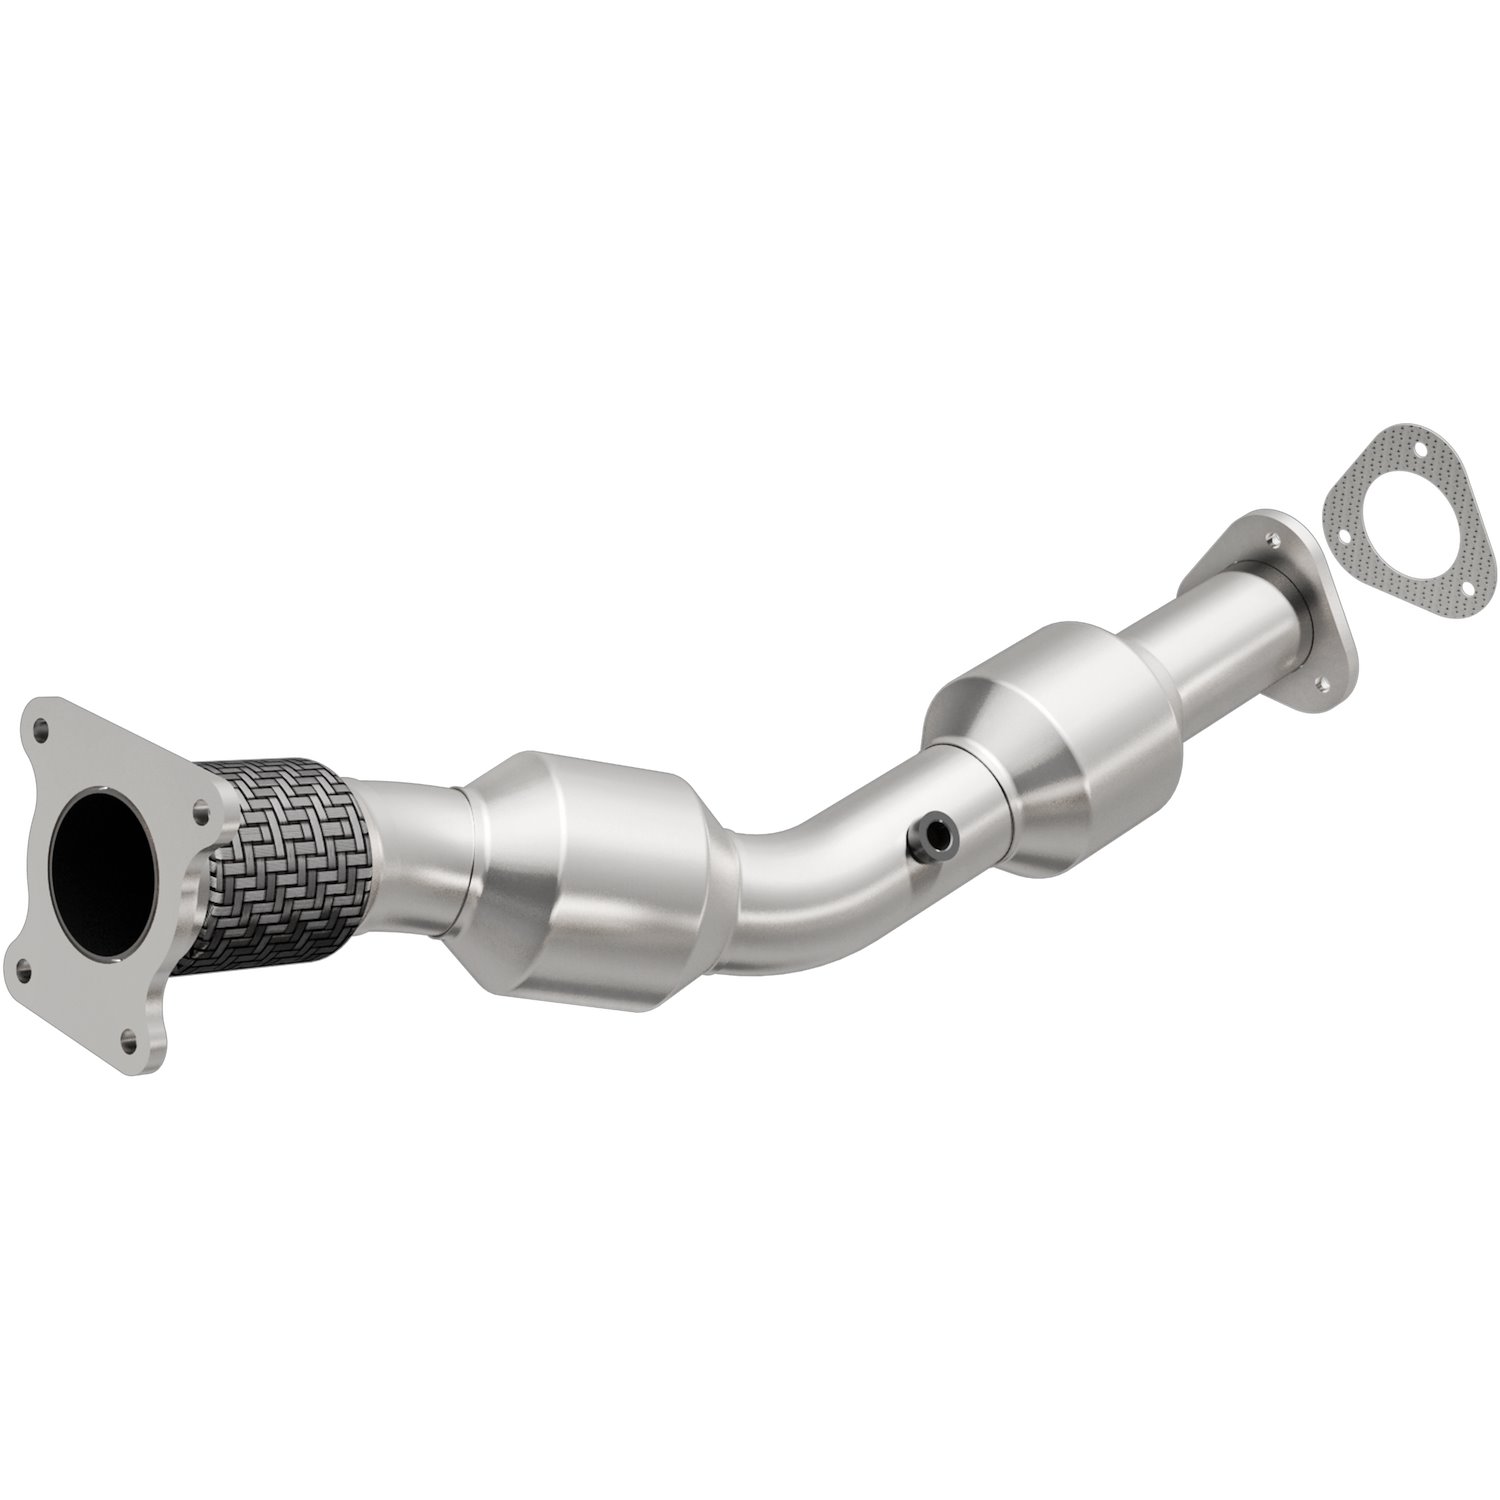 OEM Grade Federal / EPA Compliant Direct-Fit Catalytic Converter 49632